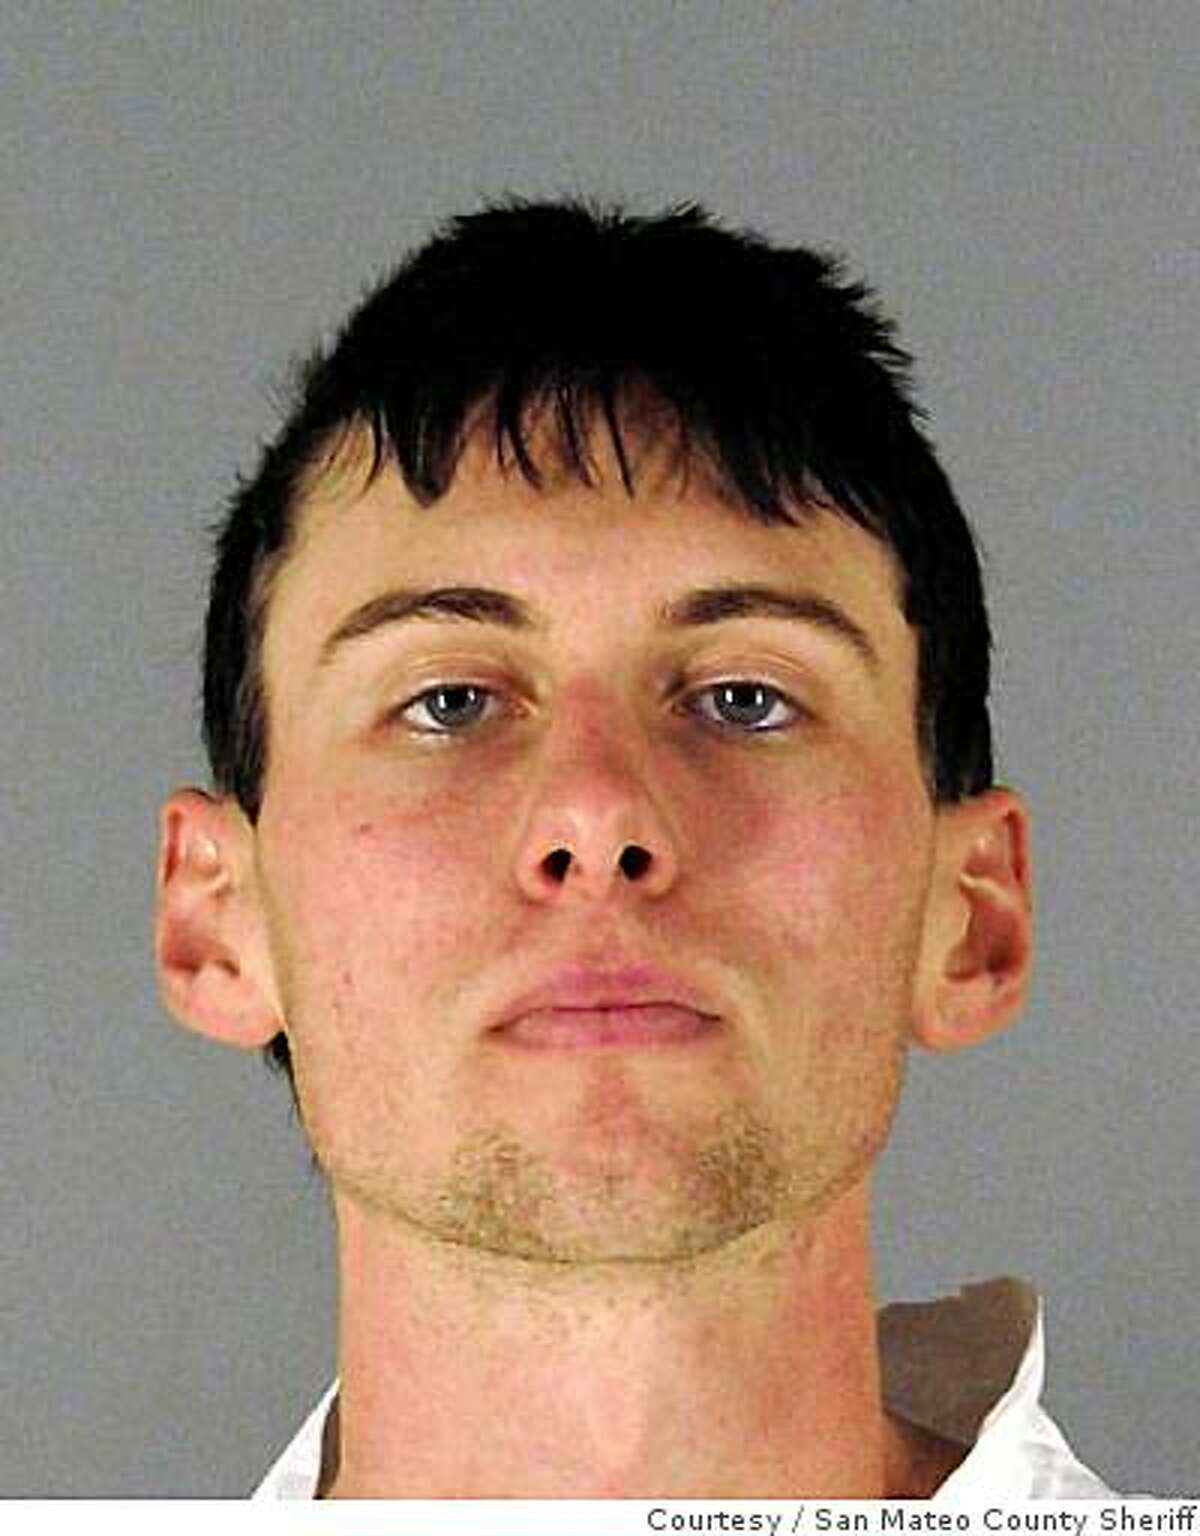 Steven Colver, suspected along with his girlfriend in the killing of his girlfriend's mother, Joann Witt, in the Sierra foothills town of El Dorado Hills.